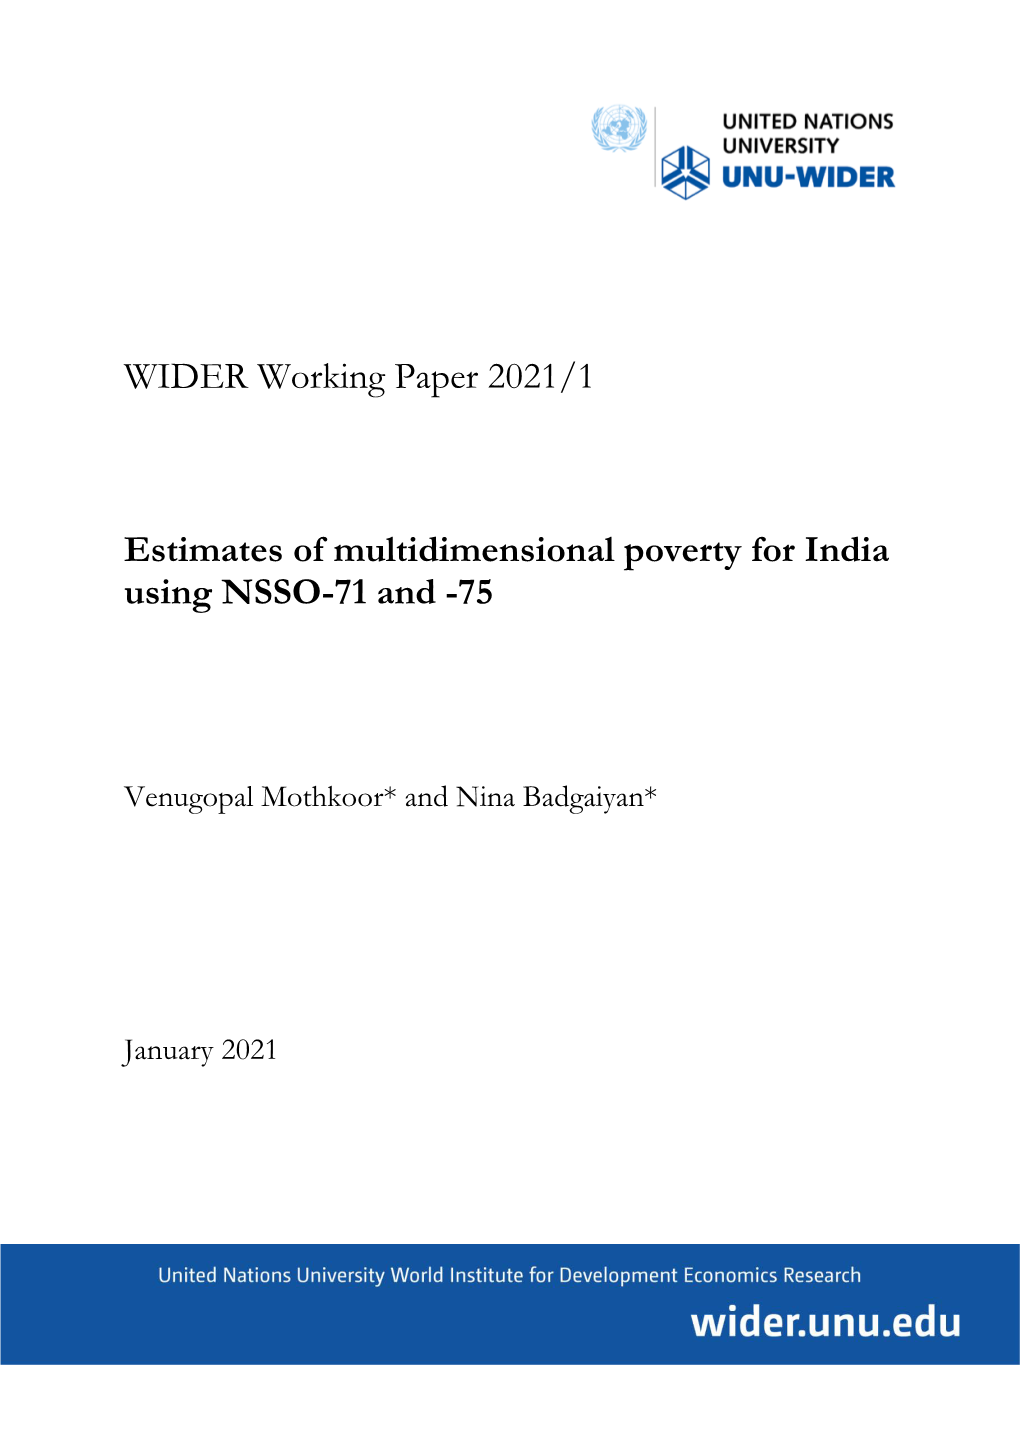 Estimates of Multidimensional Poverty for India Using NSSO-71 and -75